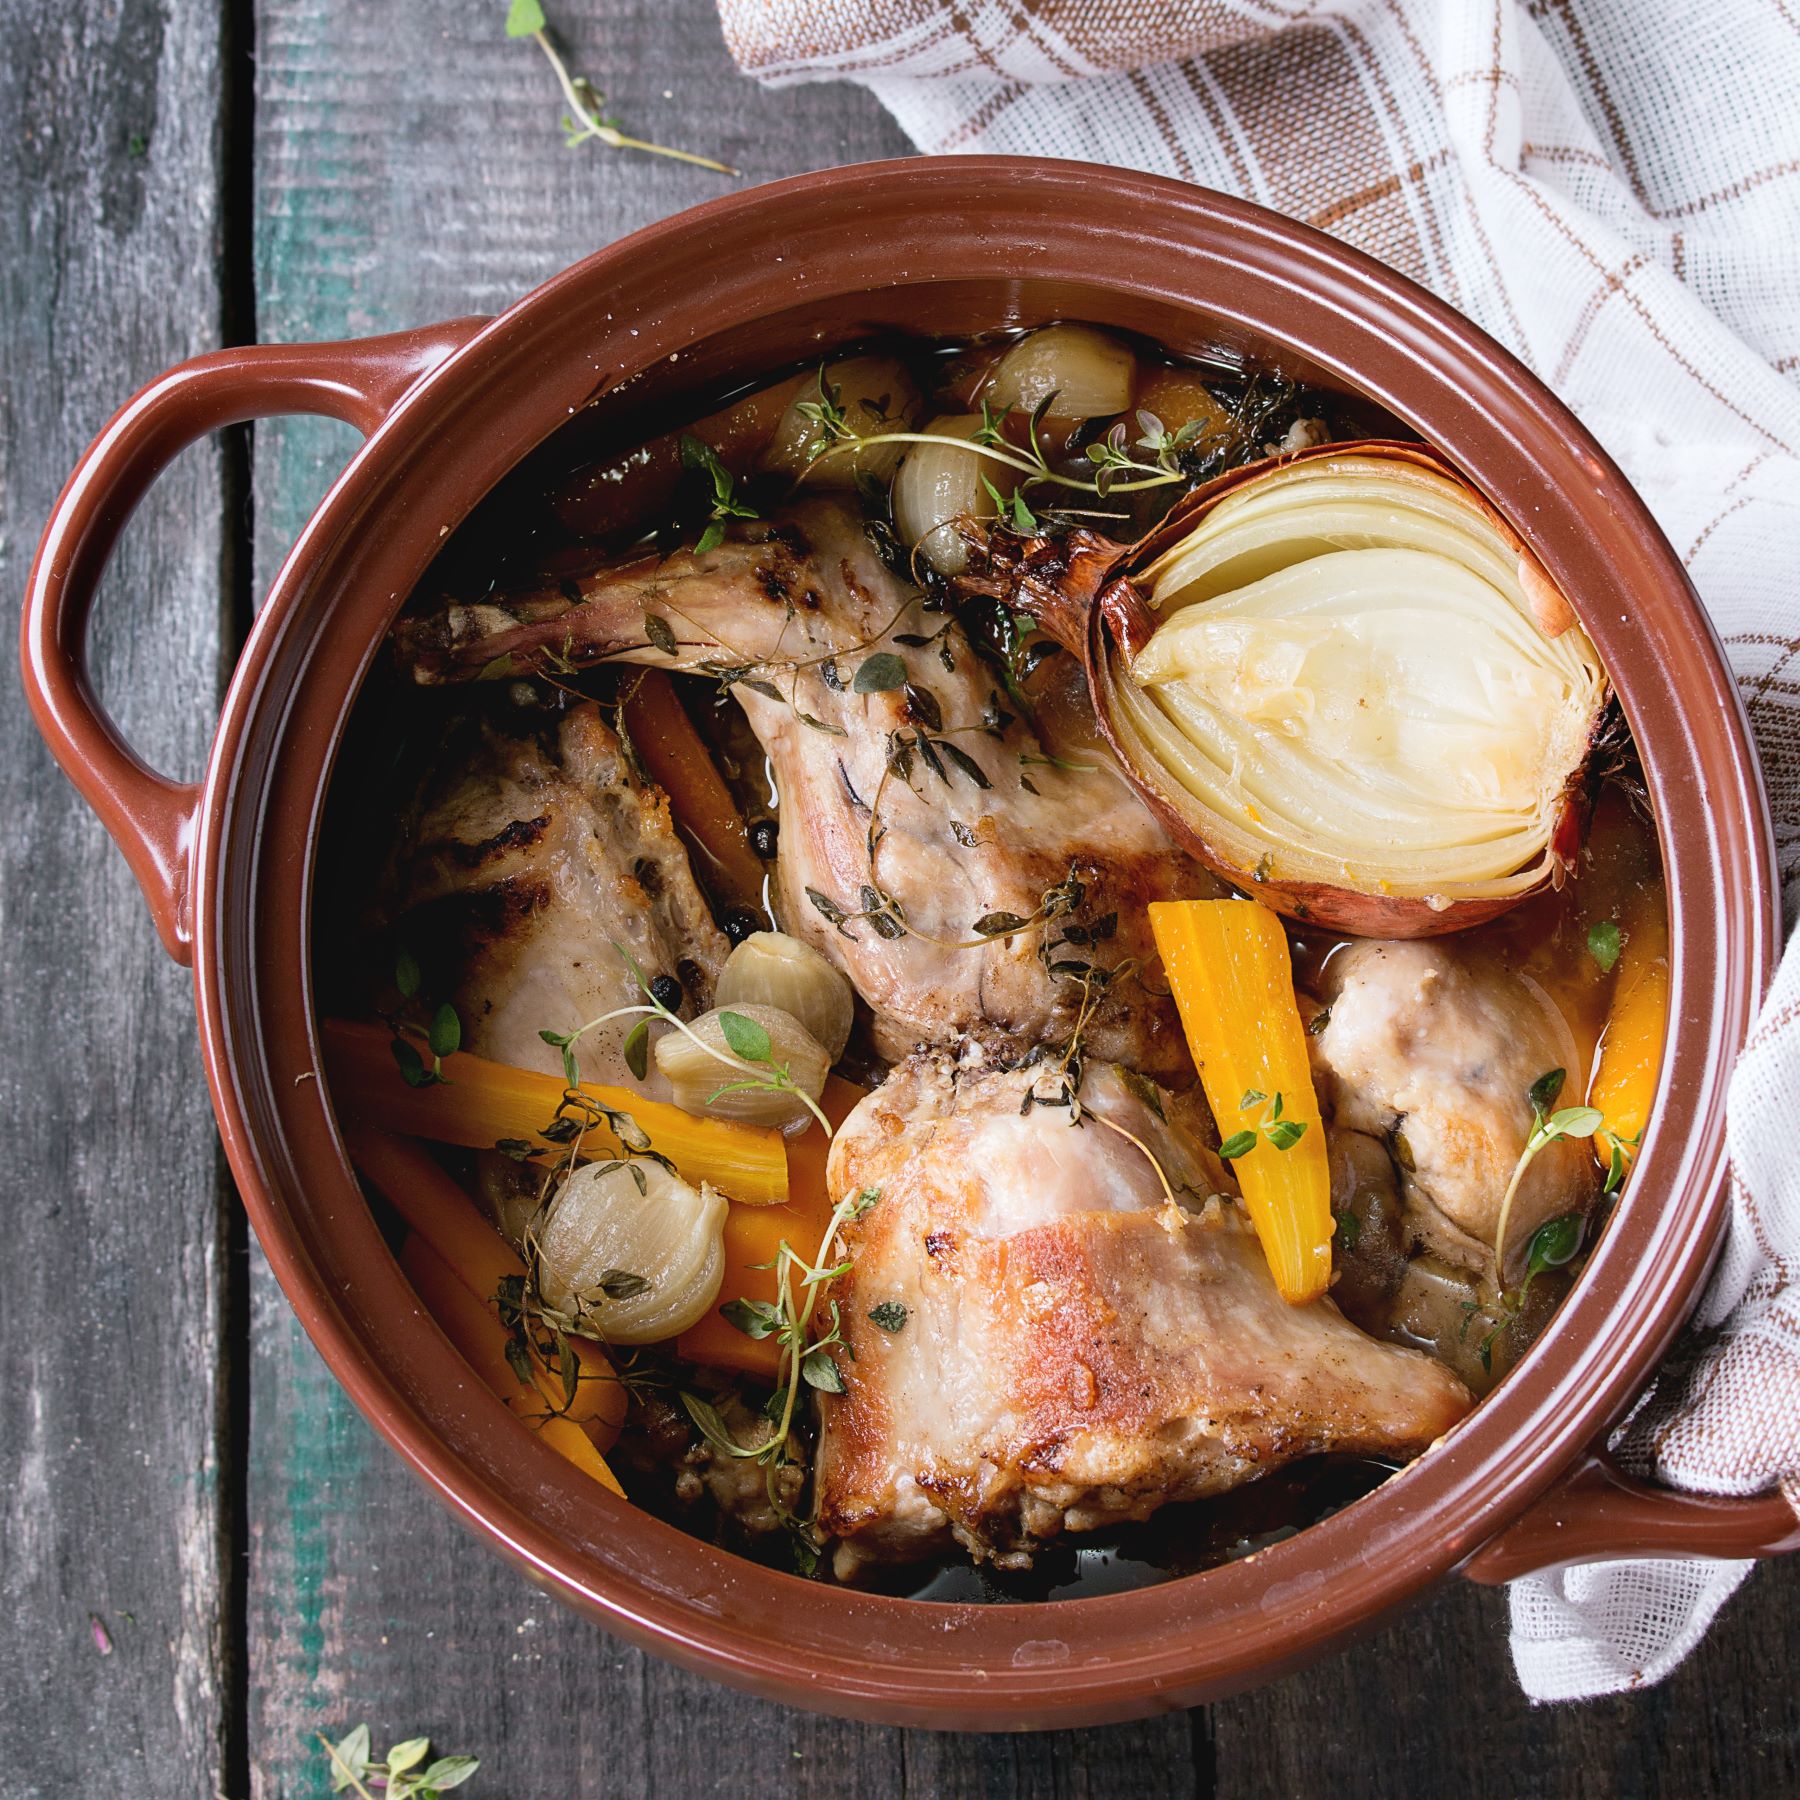 Rabbit braised with prunes and beer 